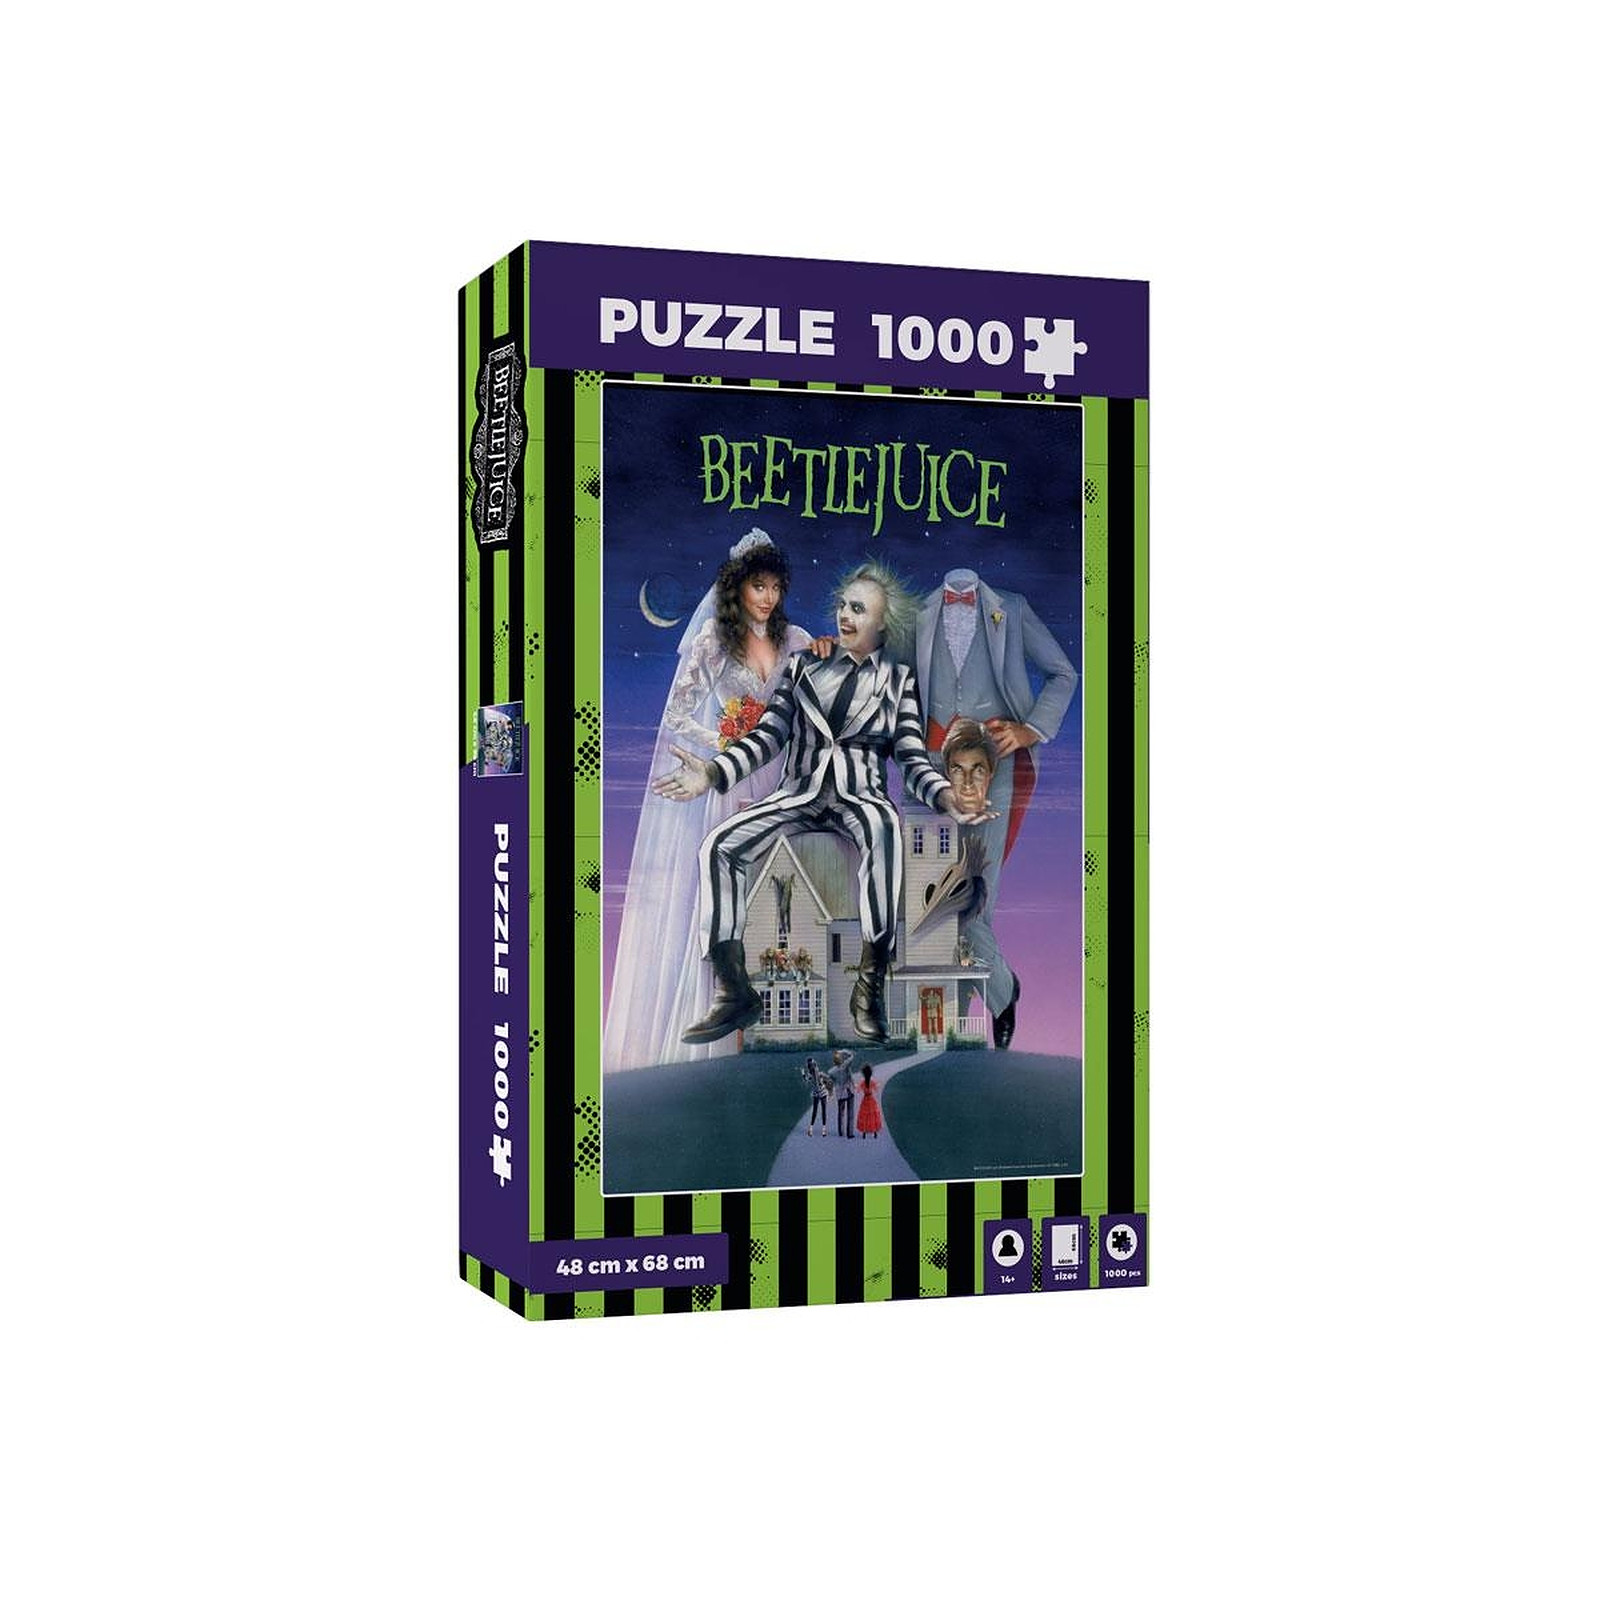 Beetlejuice - Puzzle Movie Poster - Puzzle SD Toys